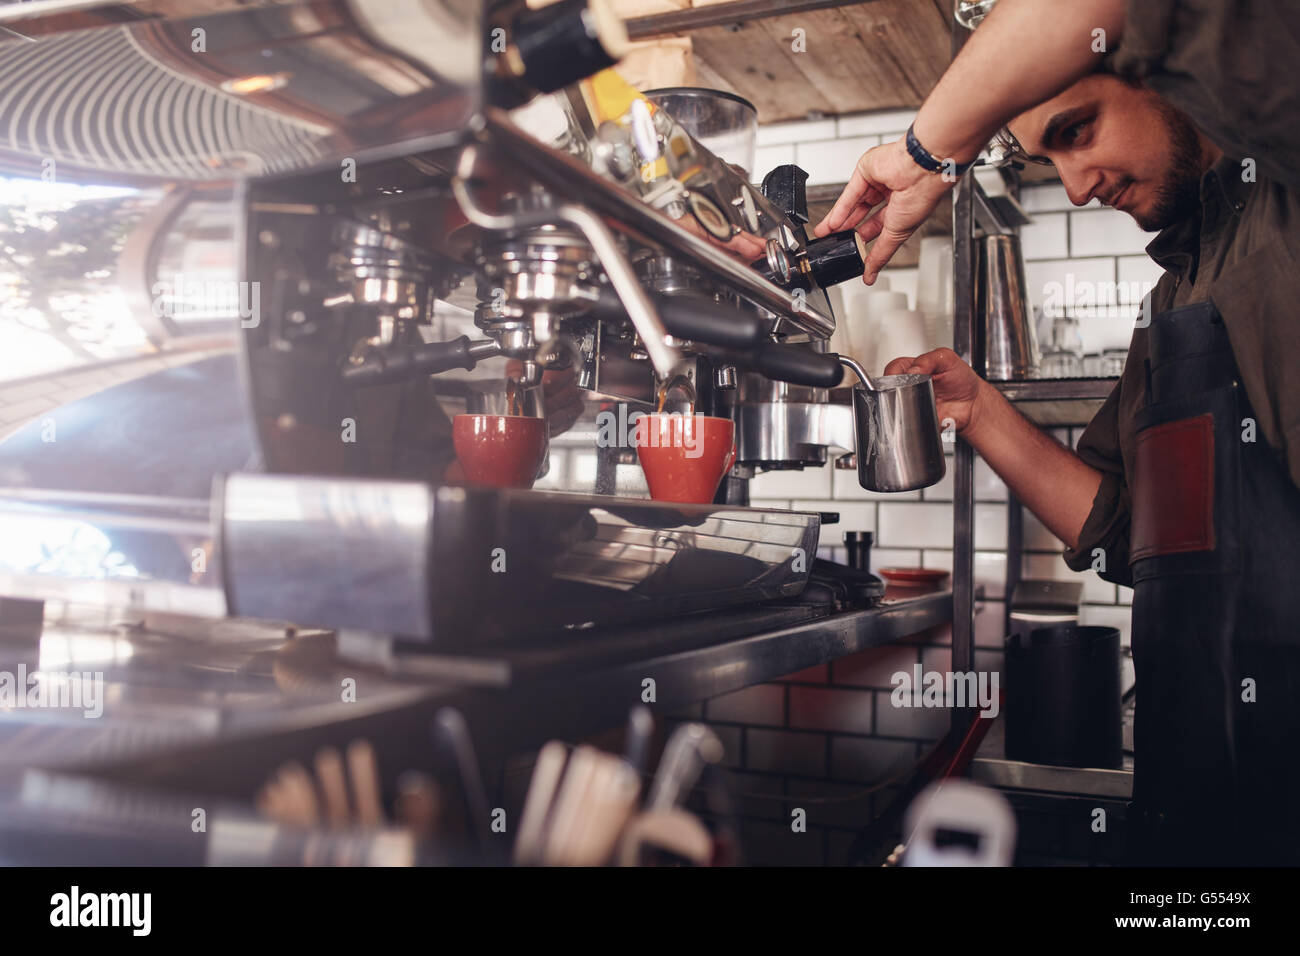 Shot of barista using a coffee maker to make a cup of coffee. Cafe worker preparing a coffee. Stock Photo